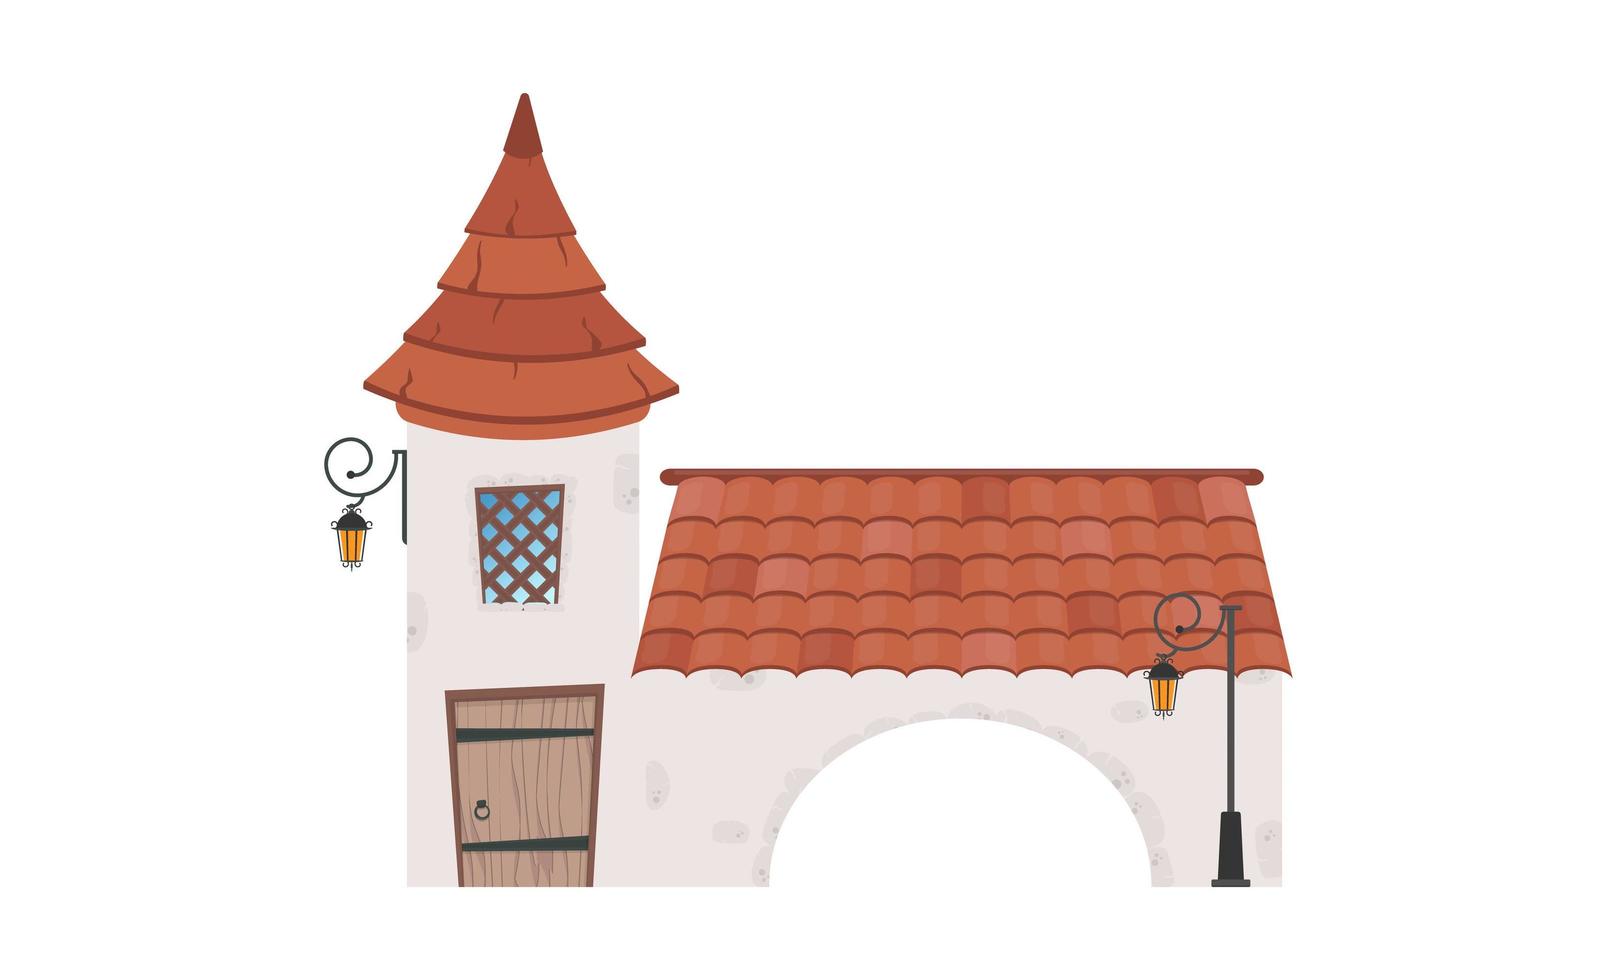 House with a tower and an arch. Stone building with windows, door and roof. Cartoon style. For the design of games, postcards and books. Isolated. Vector